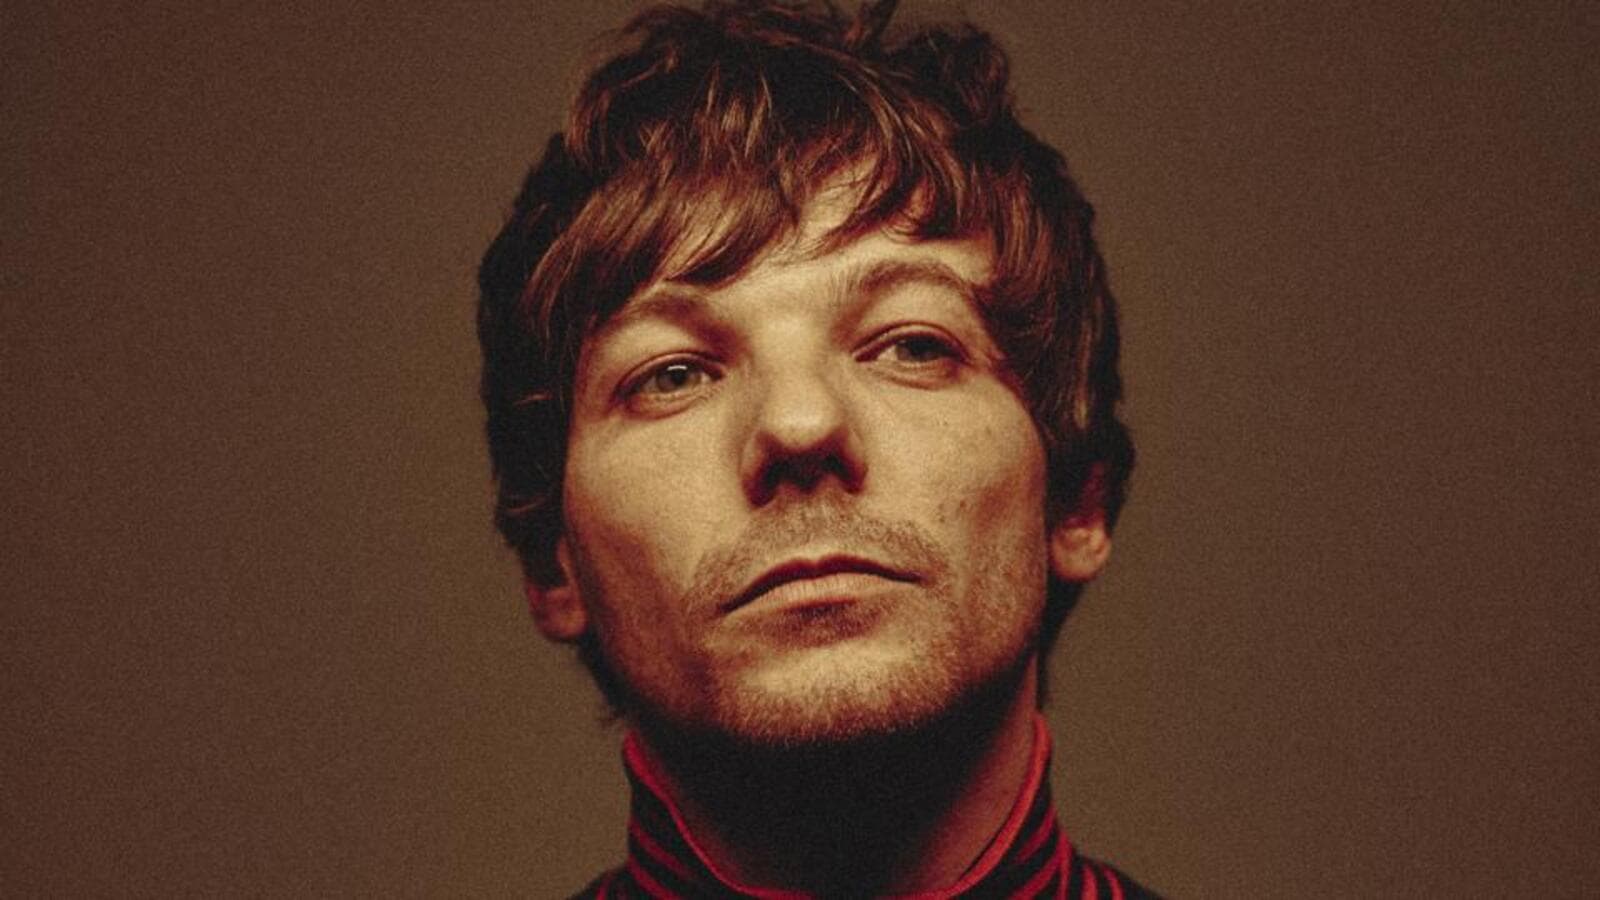 Official Limited Louis Tomlinson Faith In The Future UK & Europe